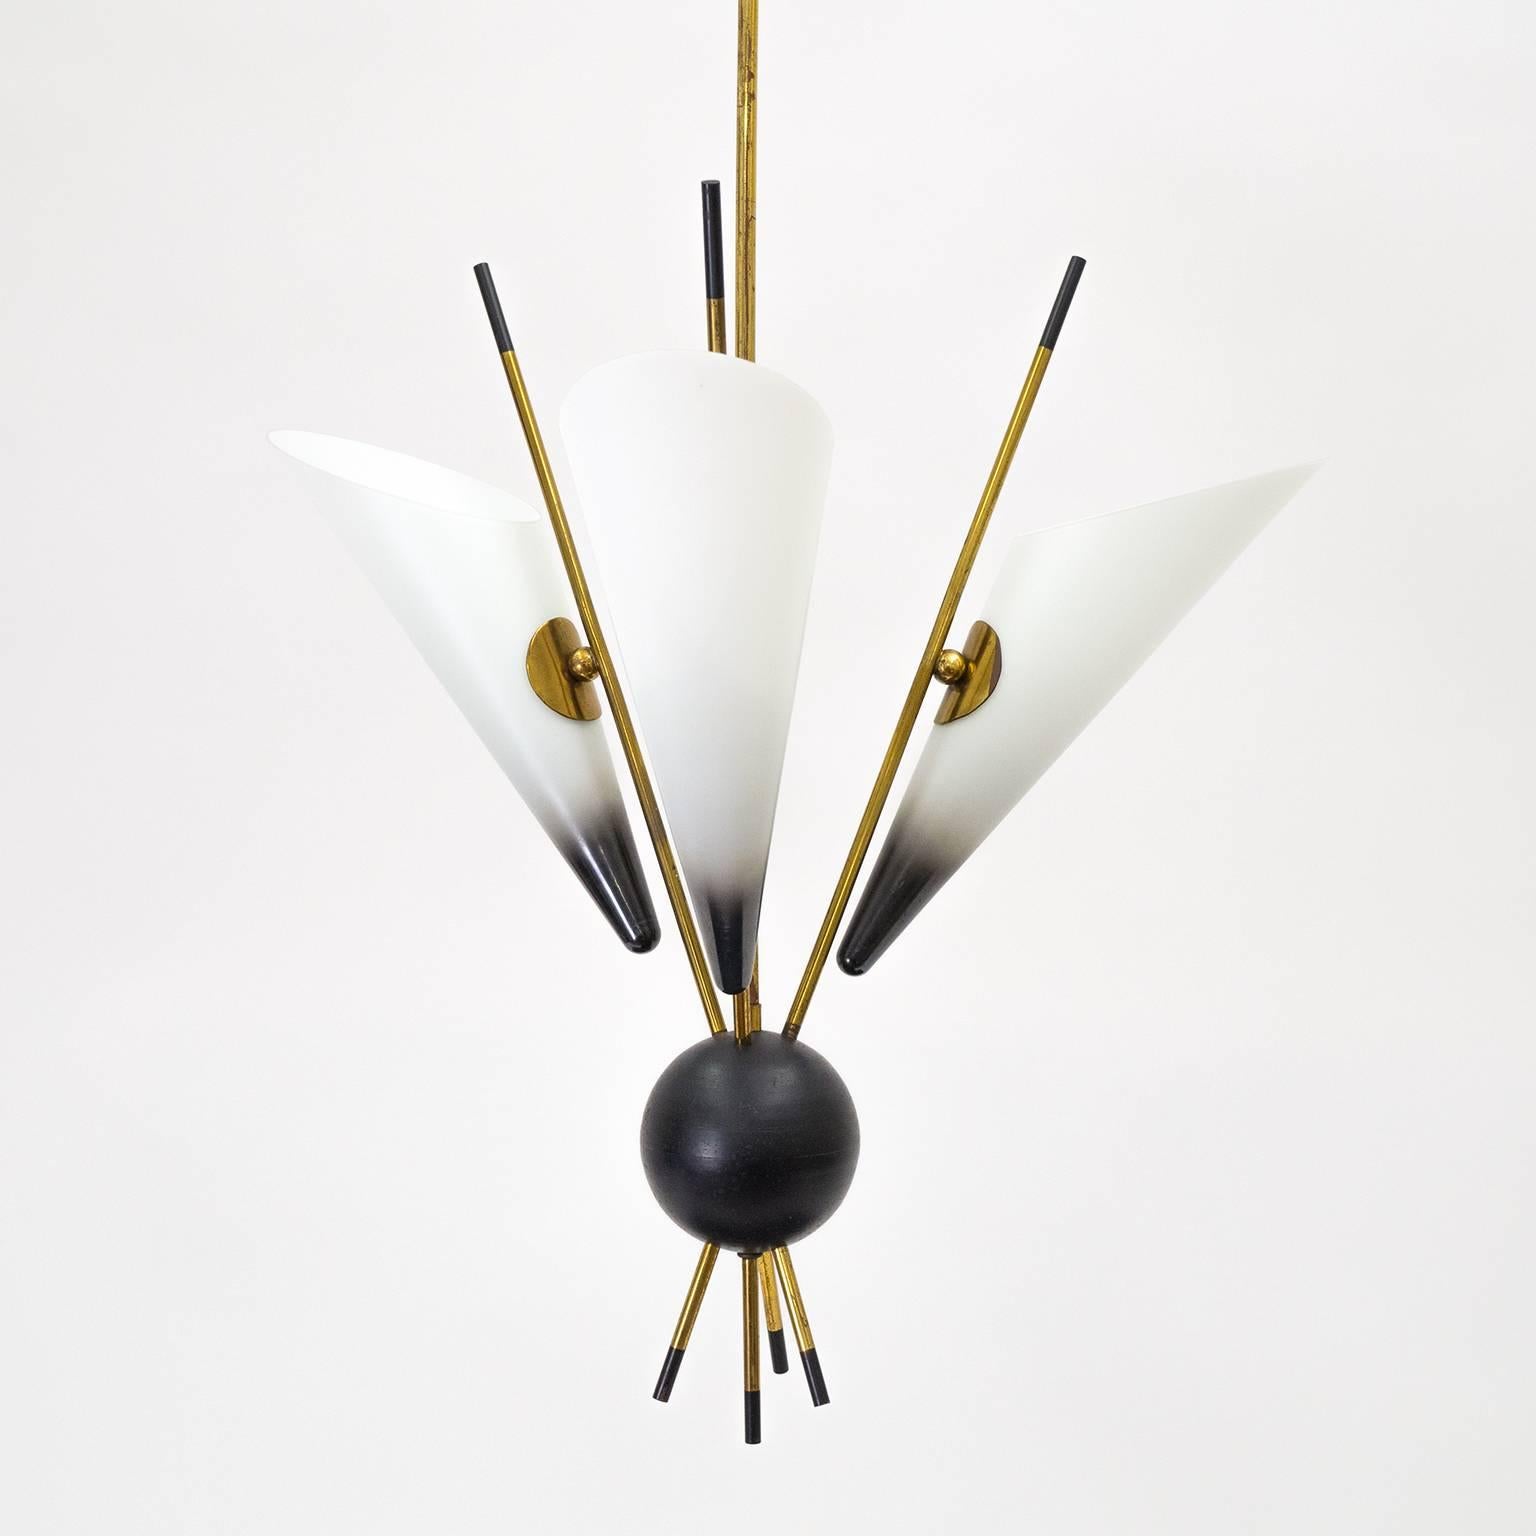 Excellent modernist Italian chandelier from the 1950s. A very unique variation on the Sputnik motif with three large glass cones - which are cased, satinated and partially enameled. Very good condition with some age-related patina on the brass